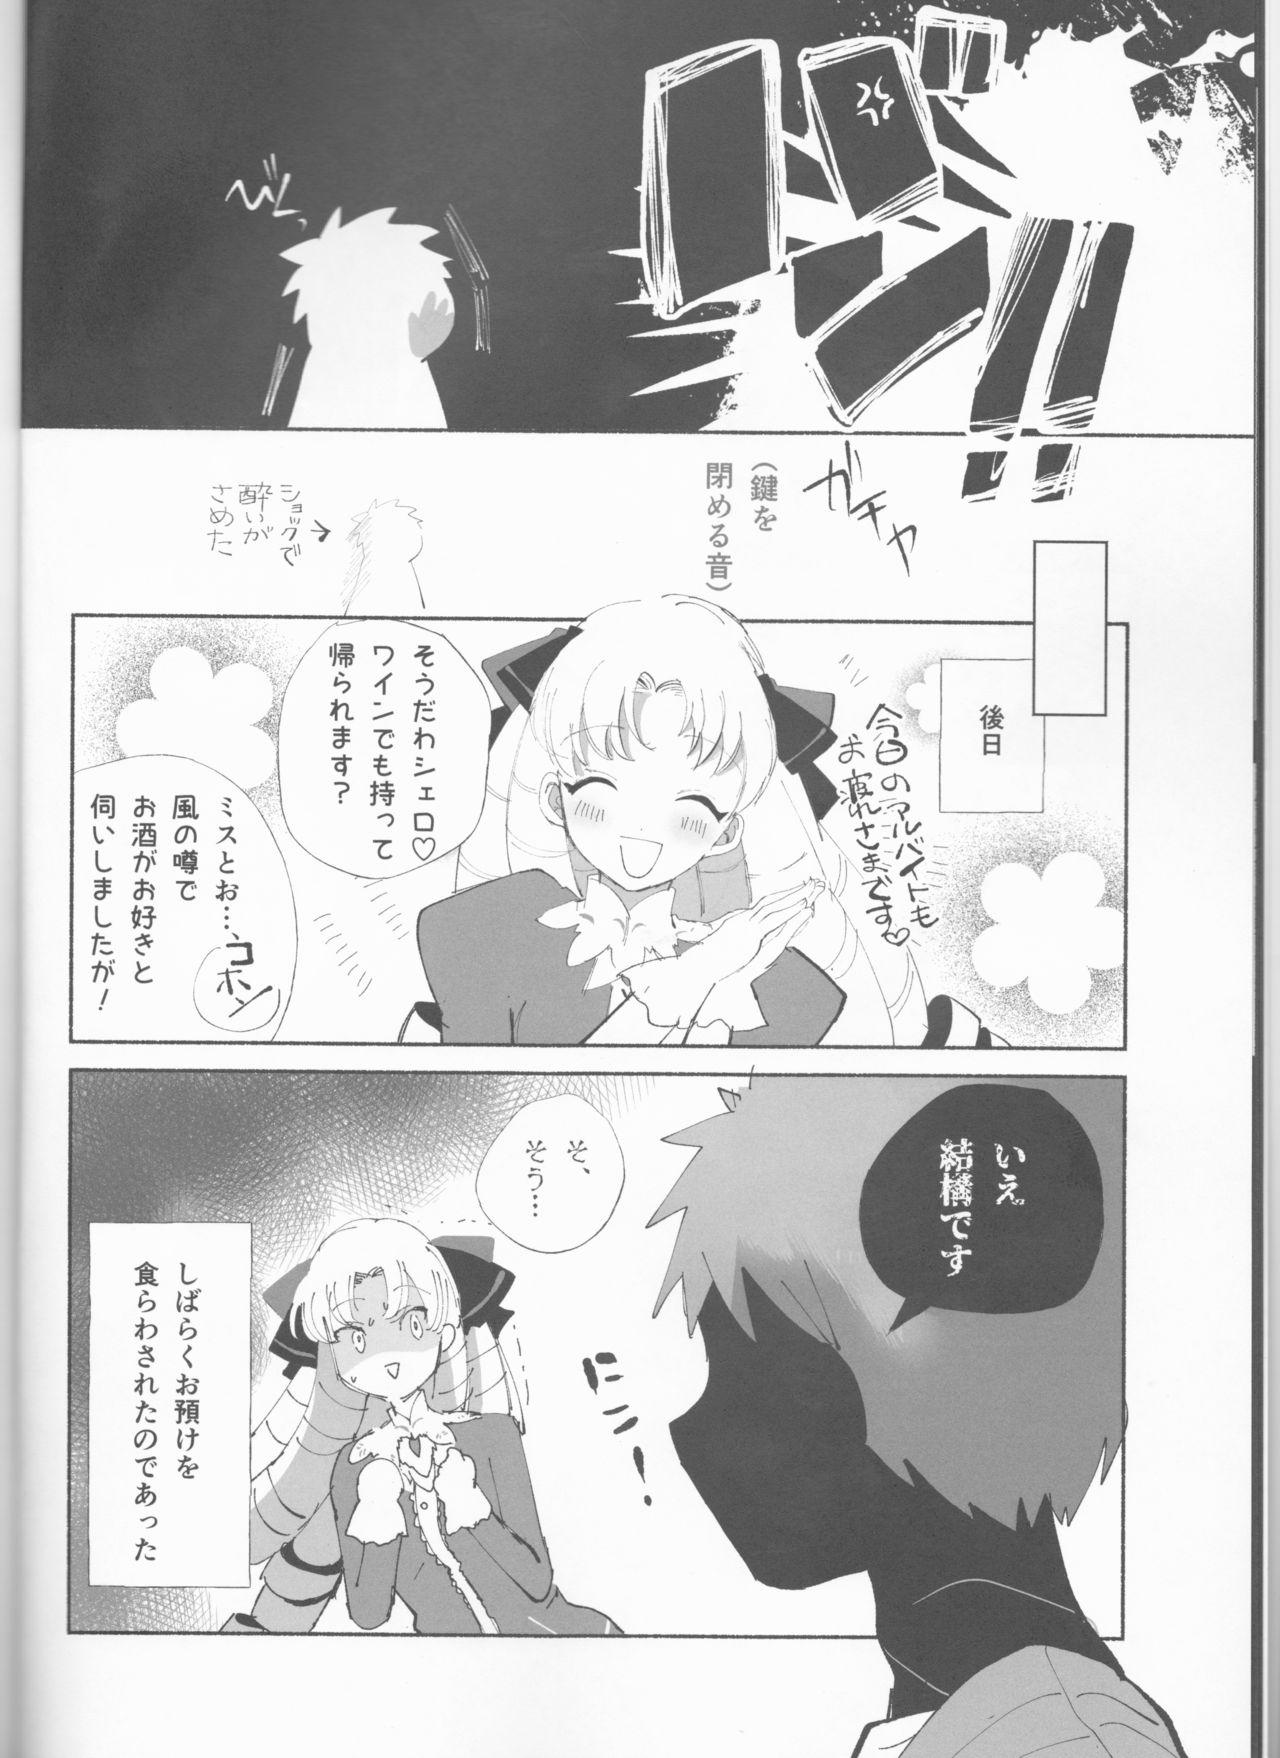 Star TRAUMEREI(Fate/stay night] - Fate stay night Delicia - Page 9